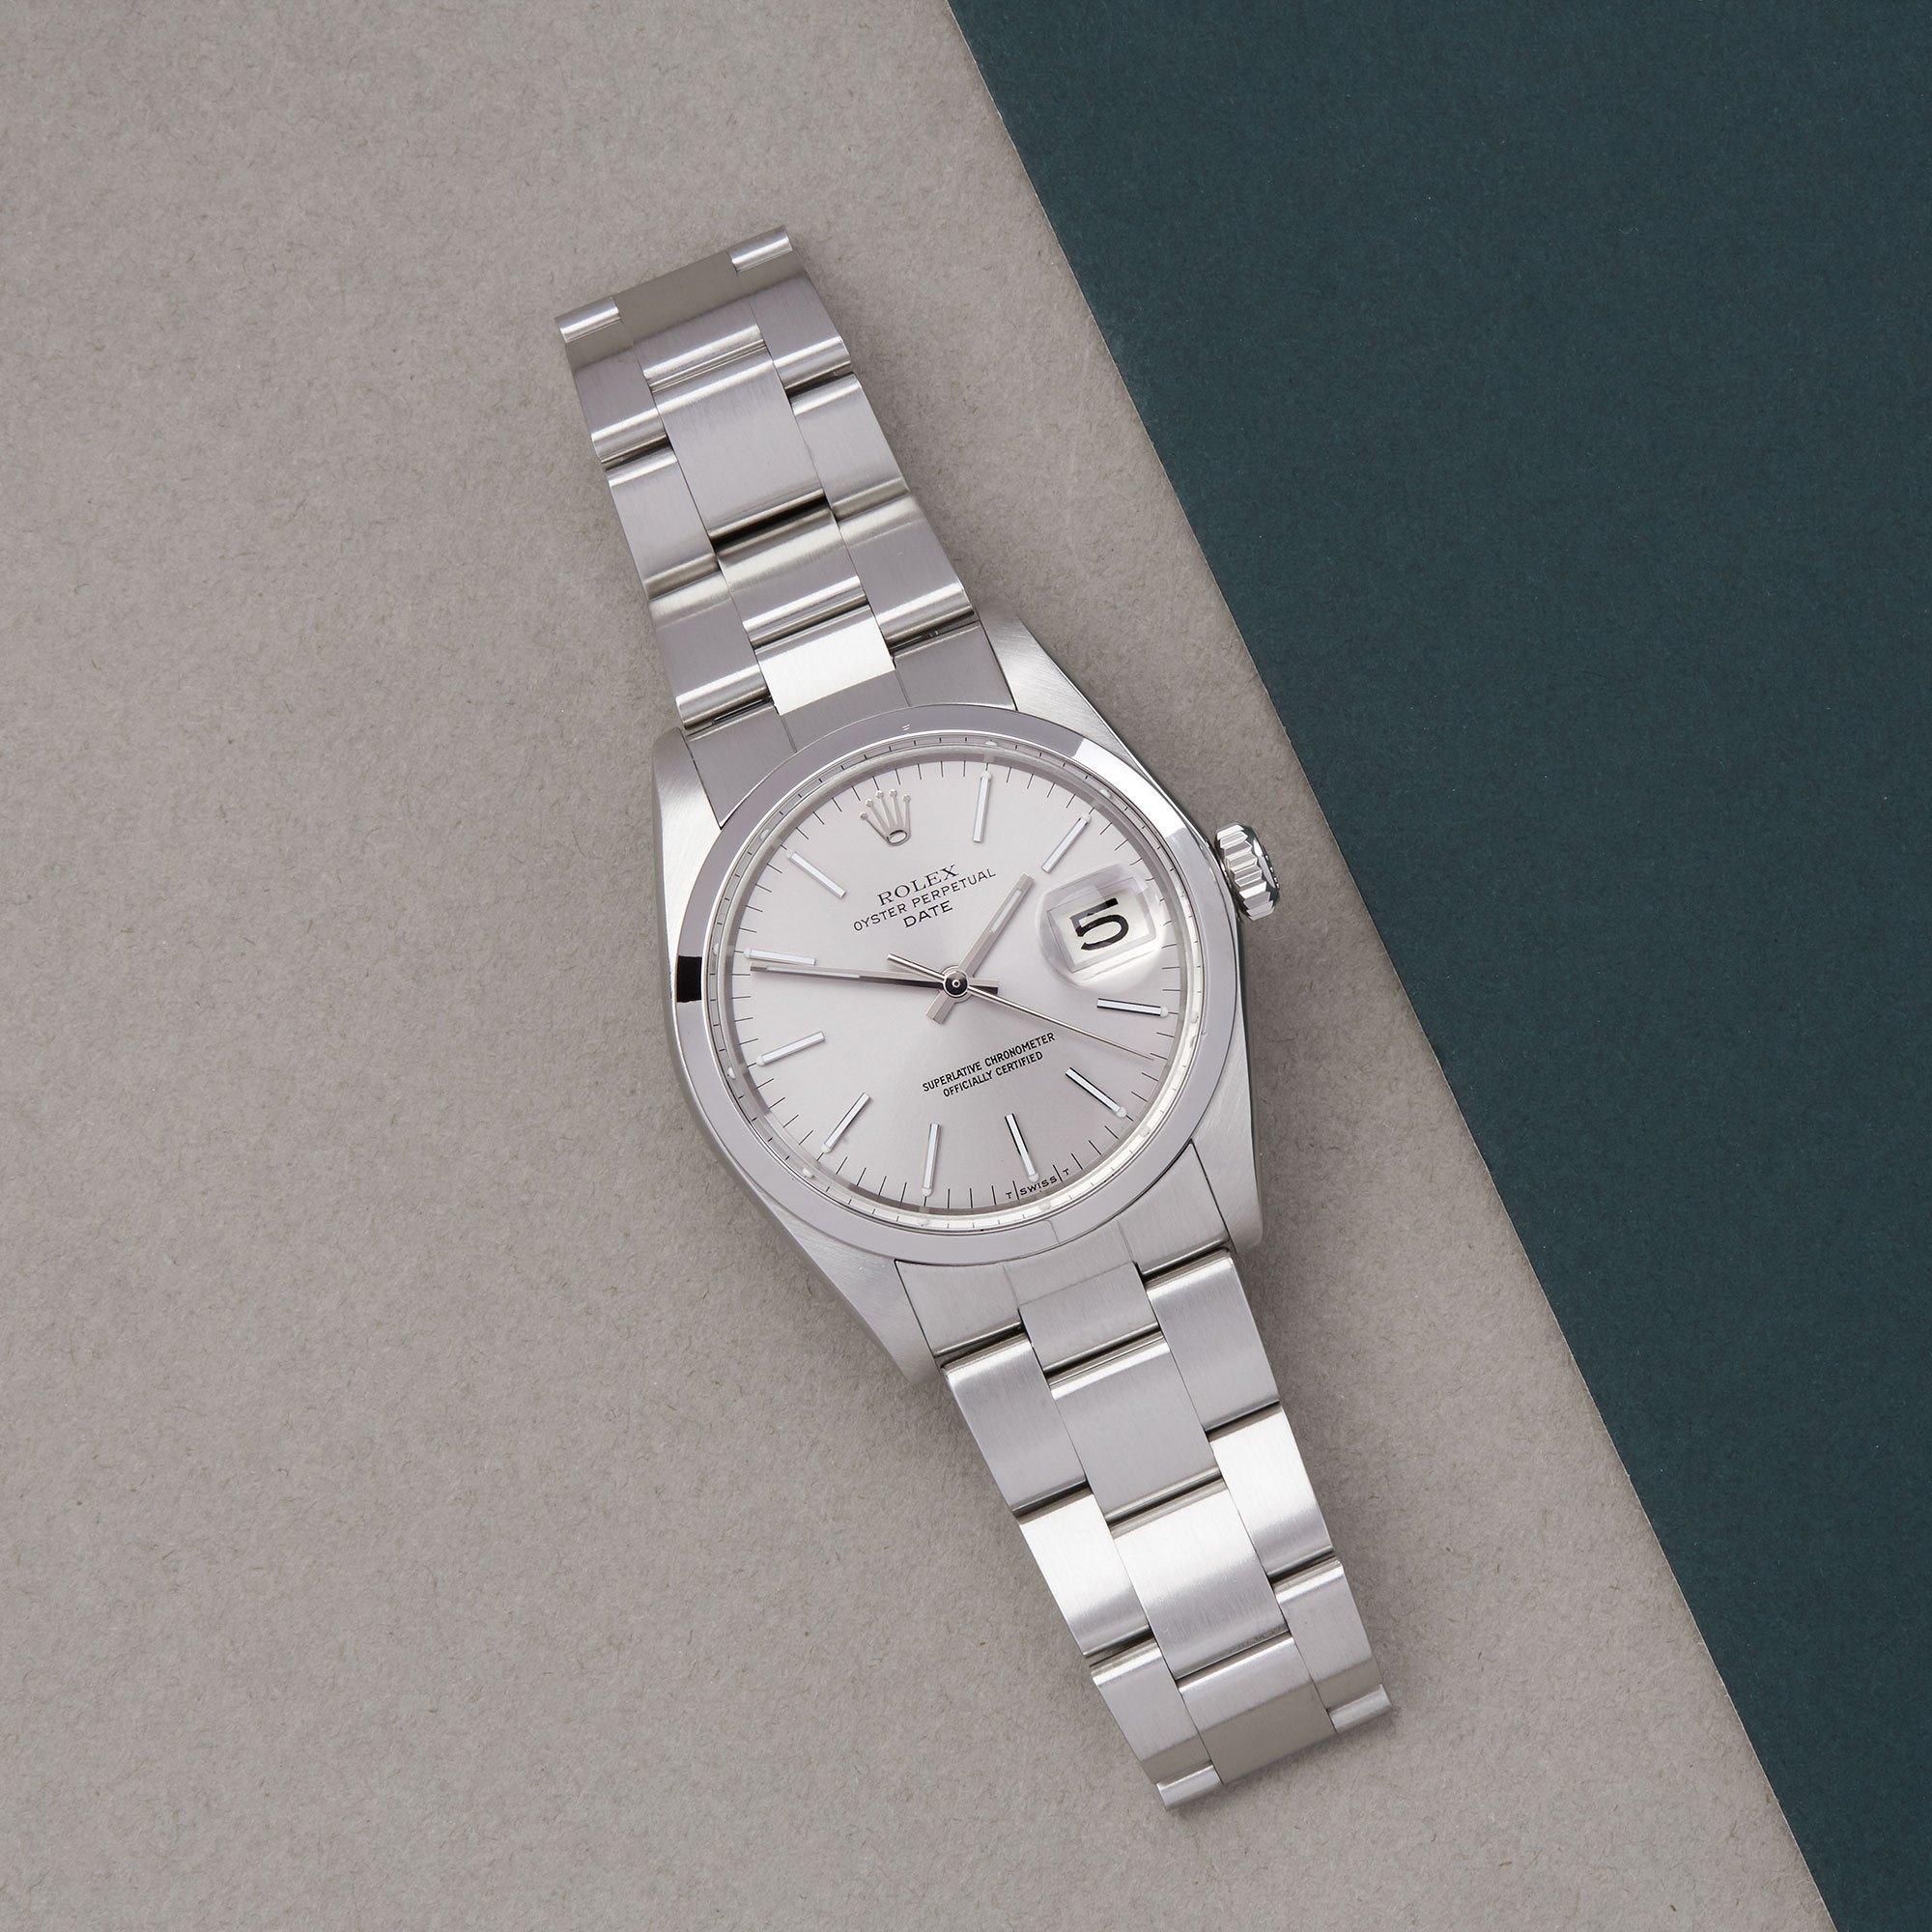 Xupes Reference: COM002719
Manufacturer: Rolex
Model: Oyster Perpetual Date
Model Variant: 0
Model Number: 1500
Age: 1976
Gender: Men
Complete With: Xupes Presentation Box
Dial: Silver Baton
Glass: Sapphire Crystal
Case Material: Stainless